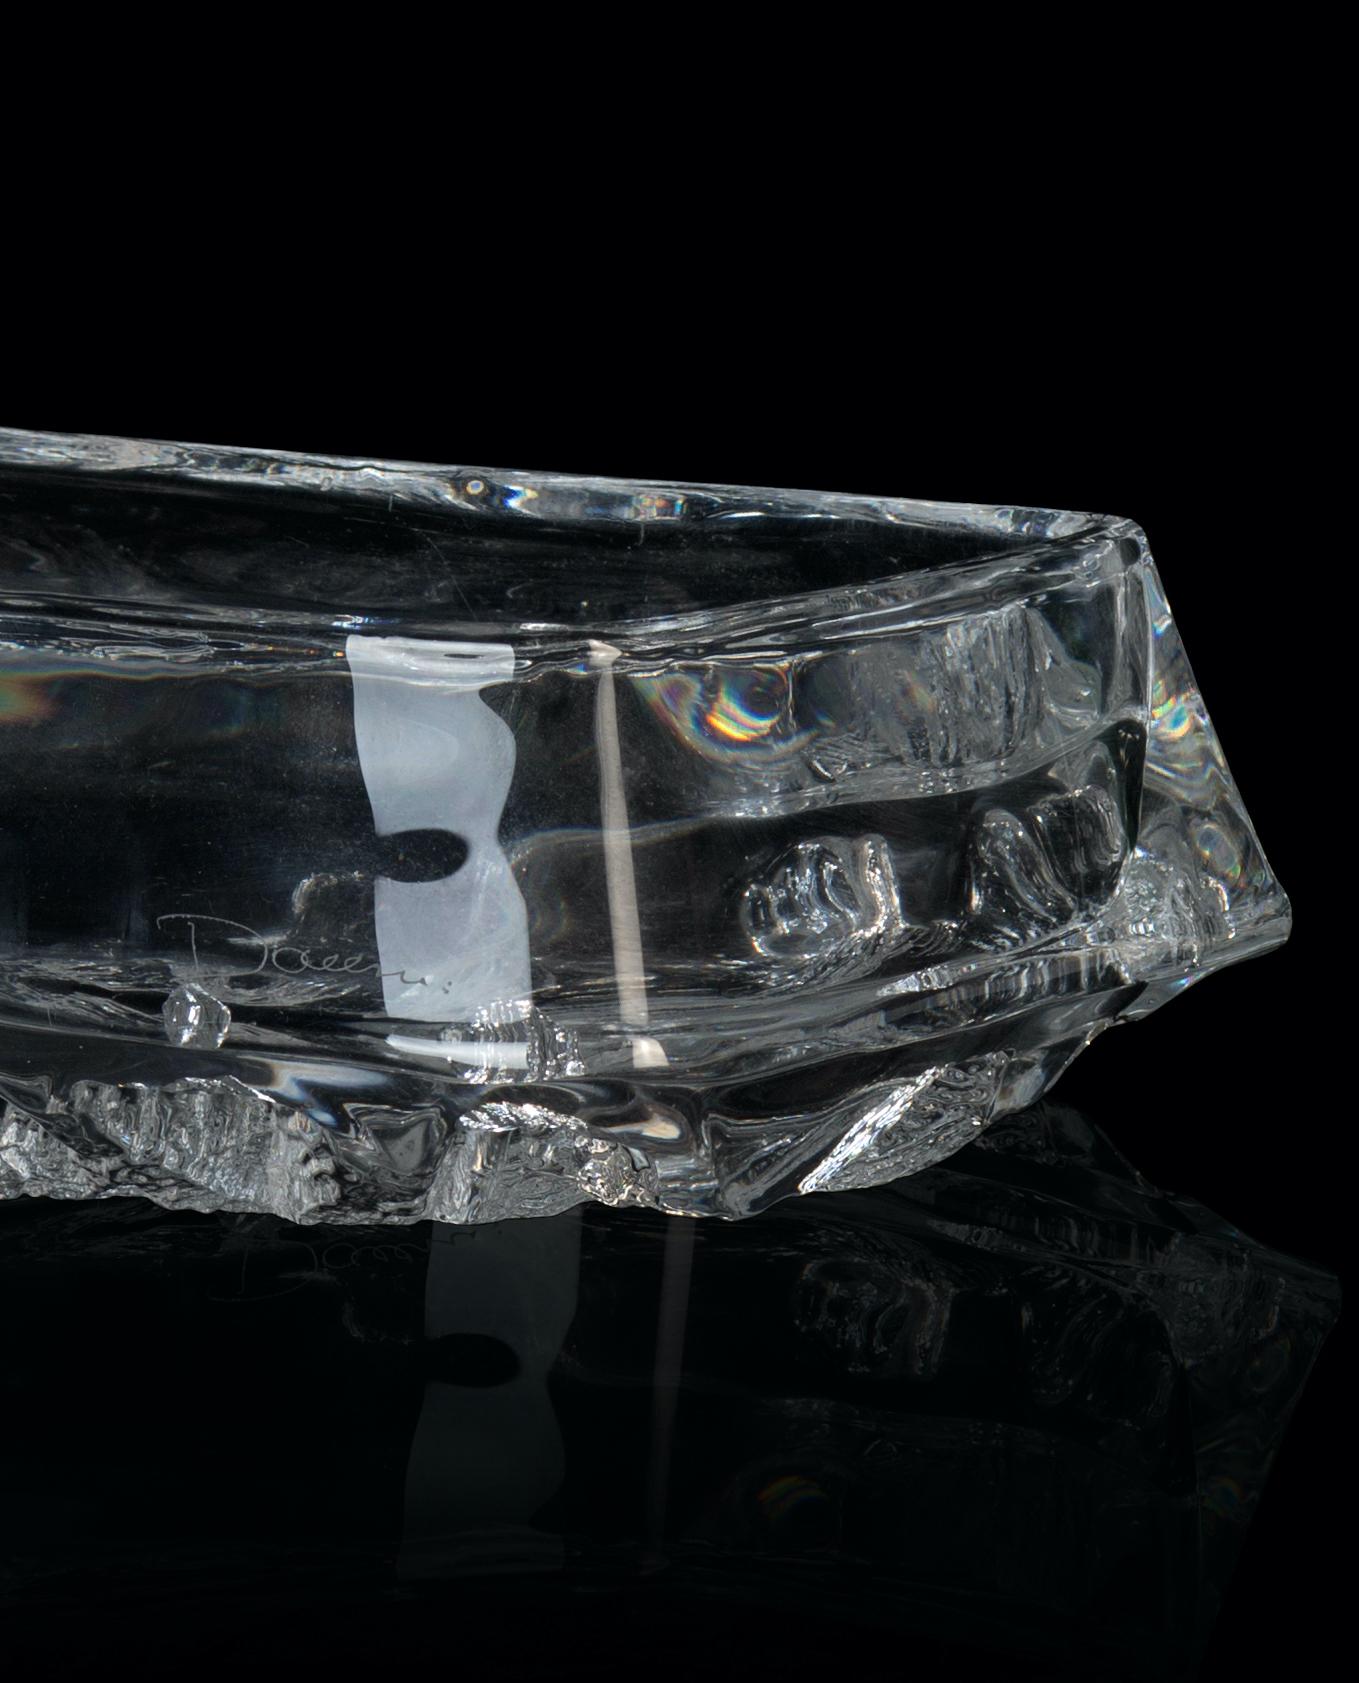 Rectangular glass centerpiece is a beautiful glass decorative object, realized by an Italian manufacture during the 1970s. 

Very fashionable transparent centerpiece. Rectangular shape with multifaceted glass decoration under the base.

Good